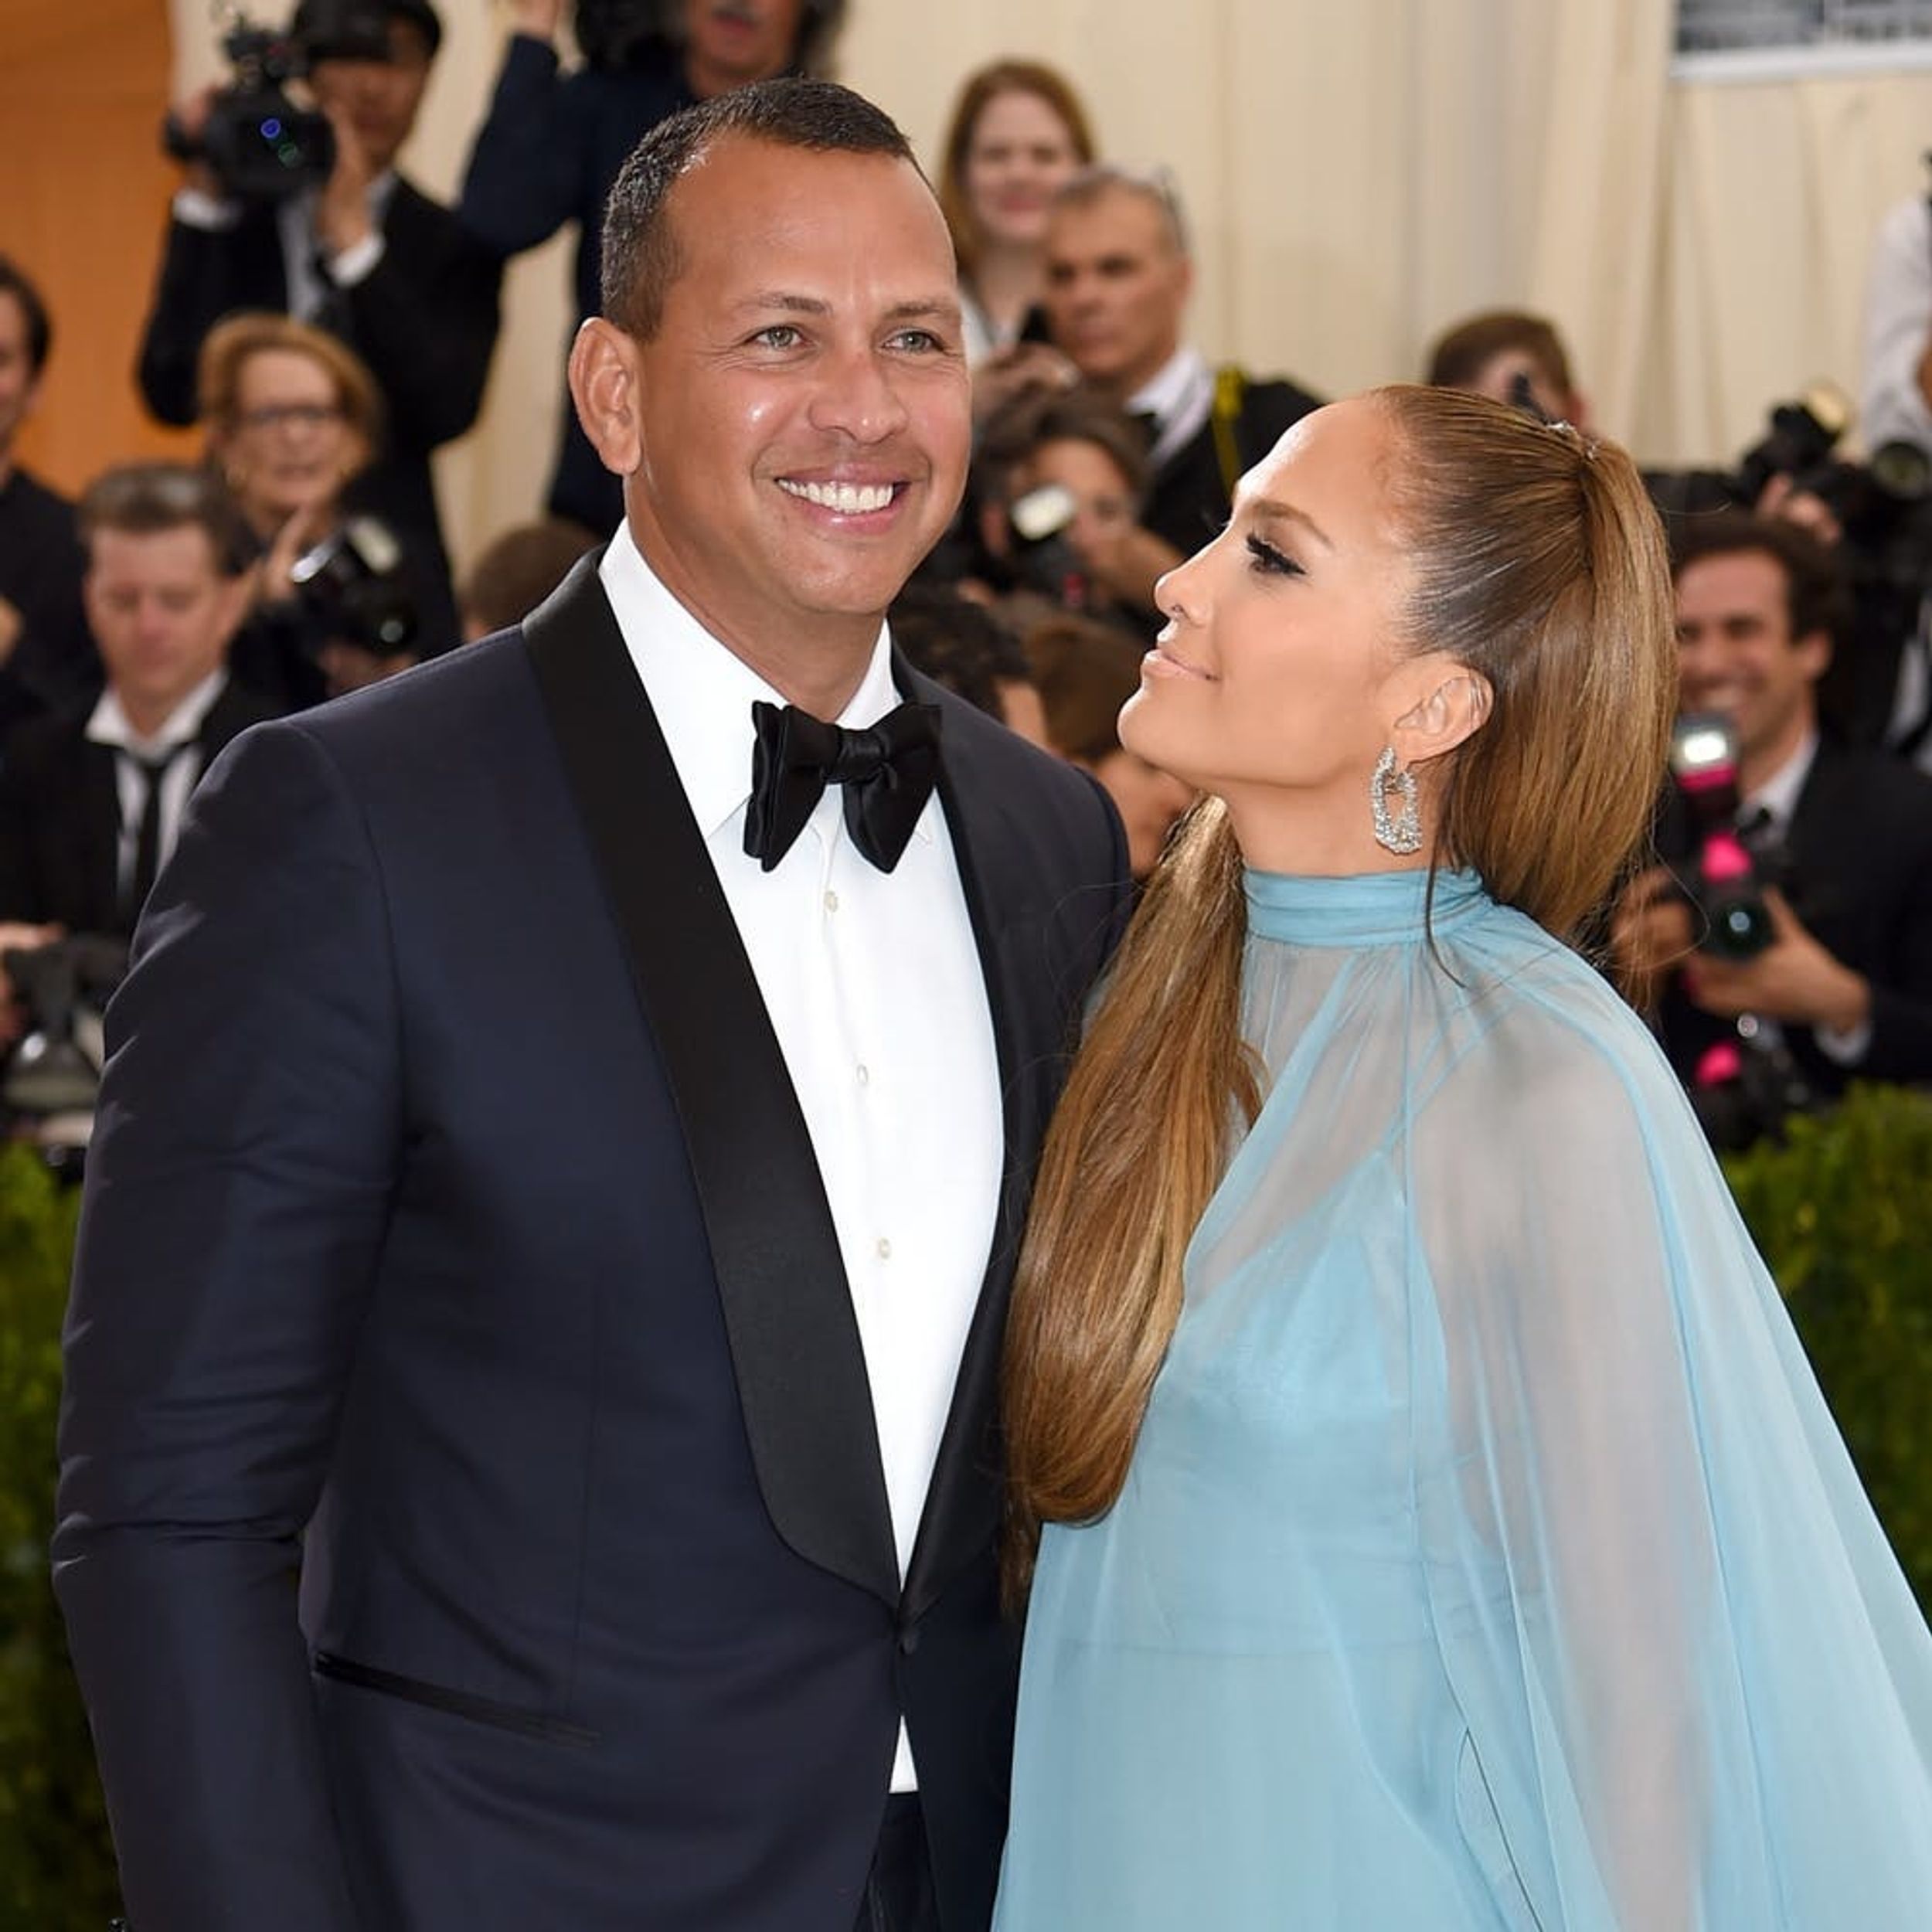 Jennifer Lopez on A-Rod: “I’m in a Good Relationship… for the First Time, Maybe Ever”